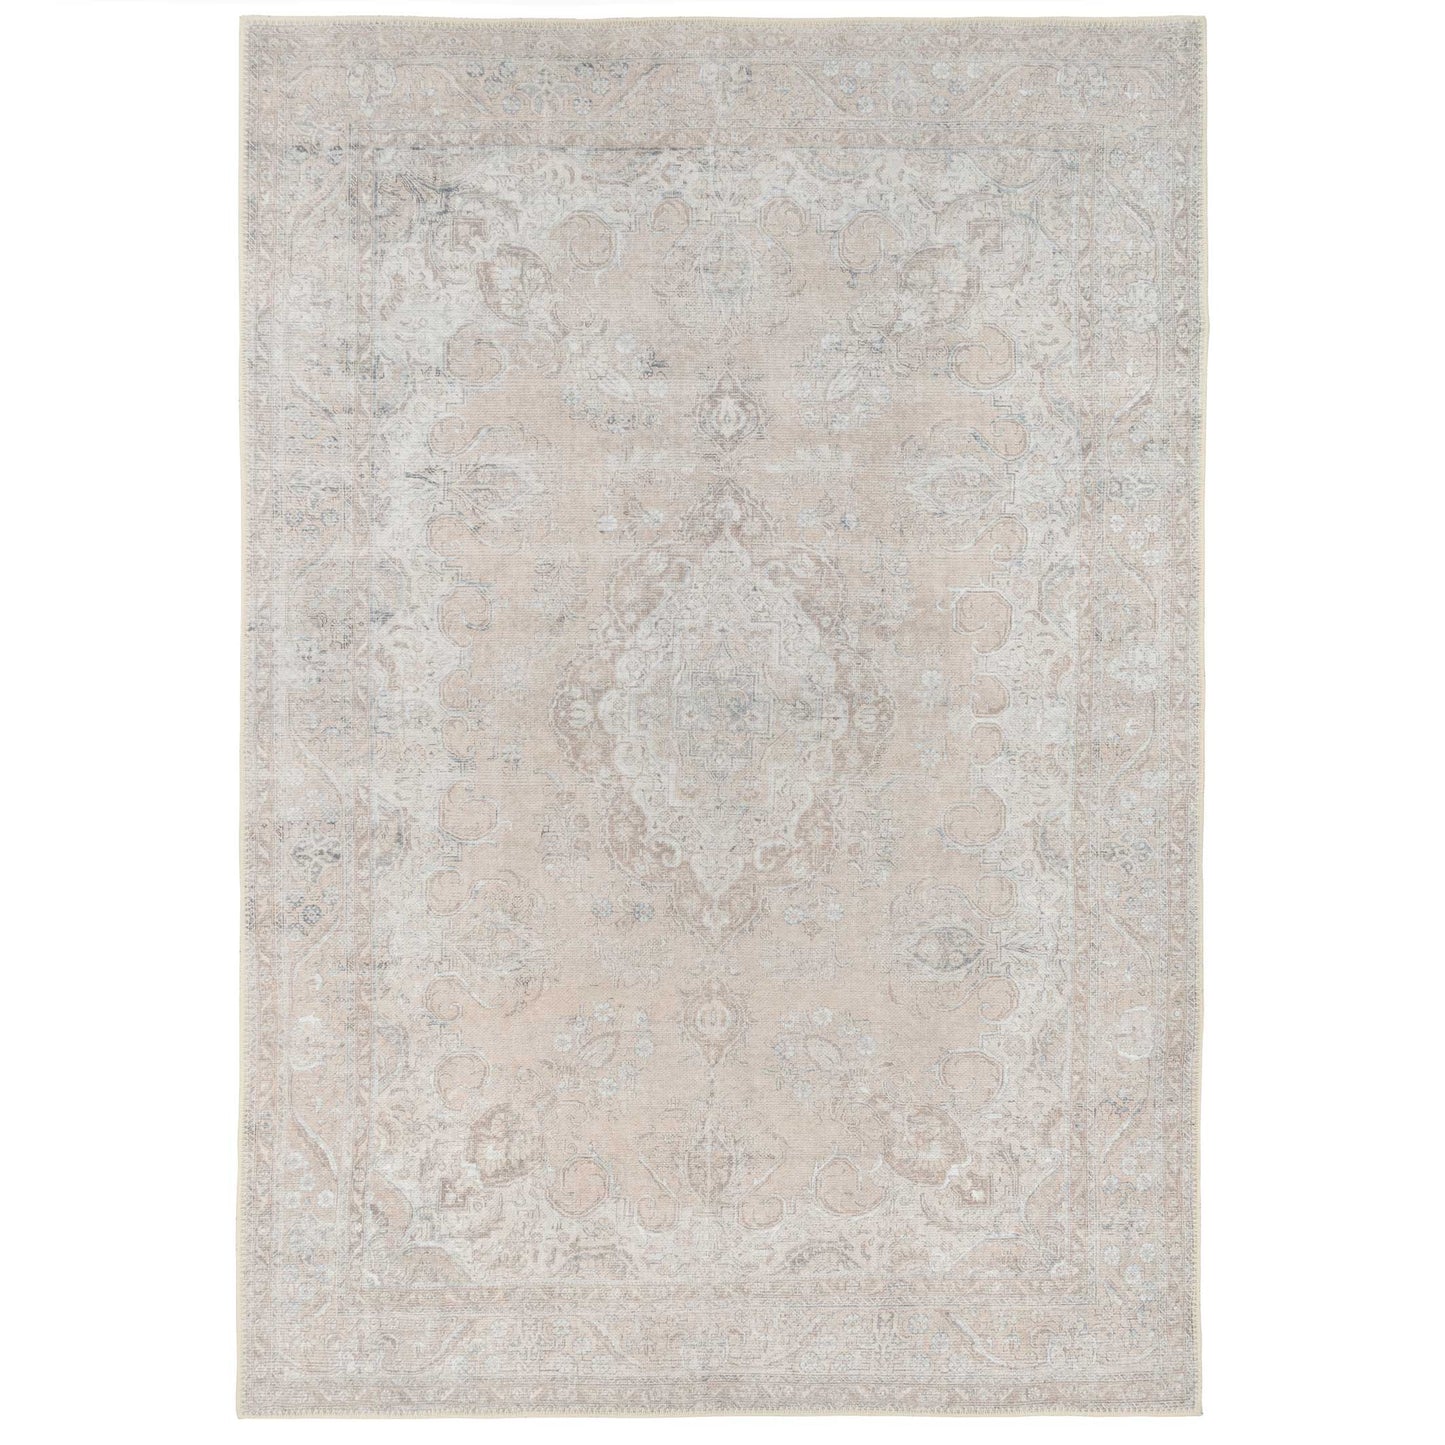 Traditional Distressed Beige Washable Rug